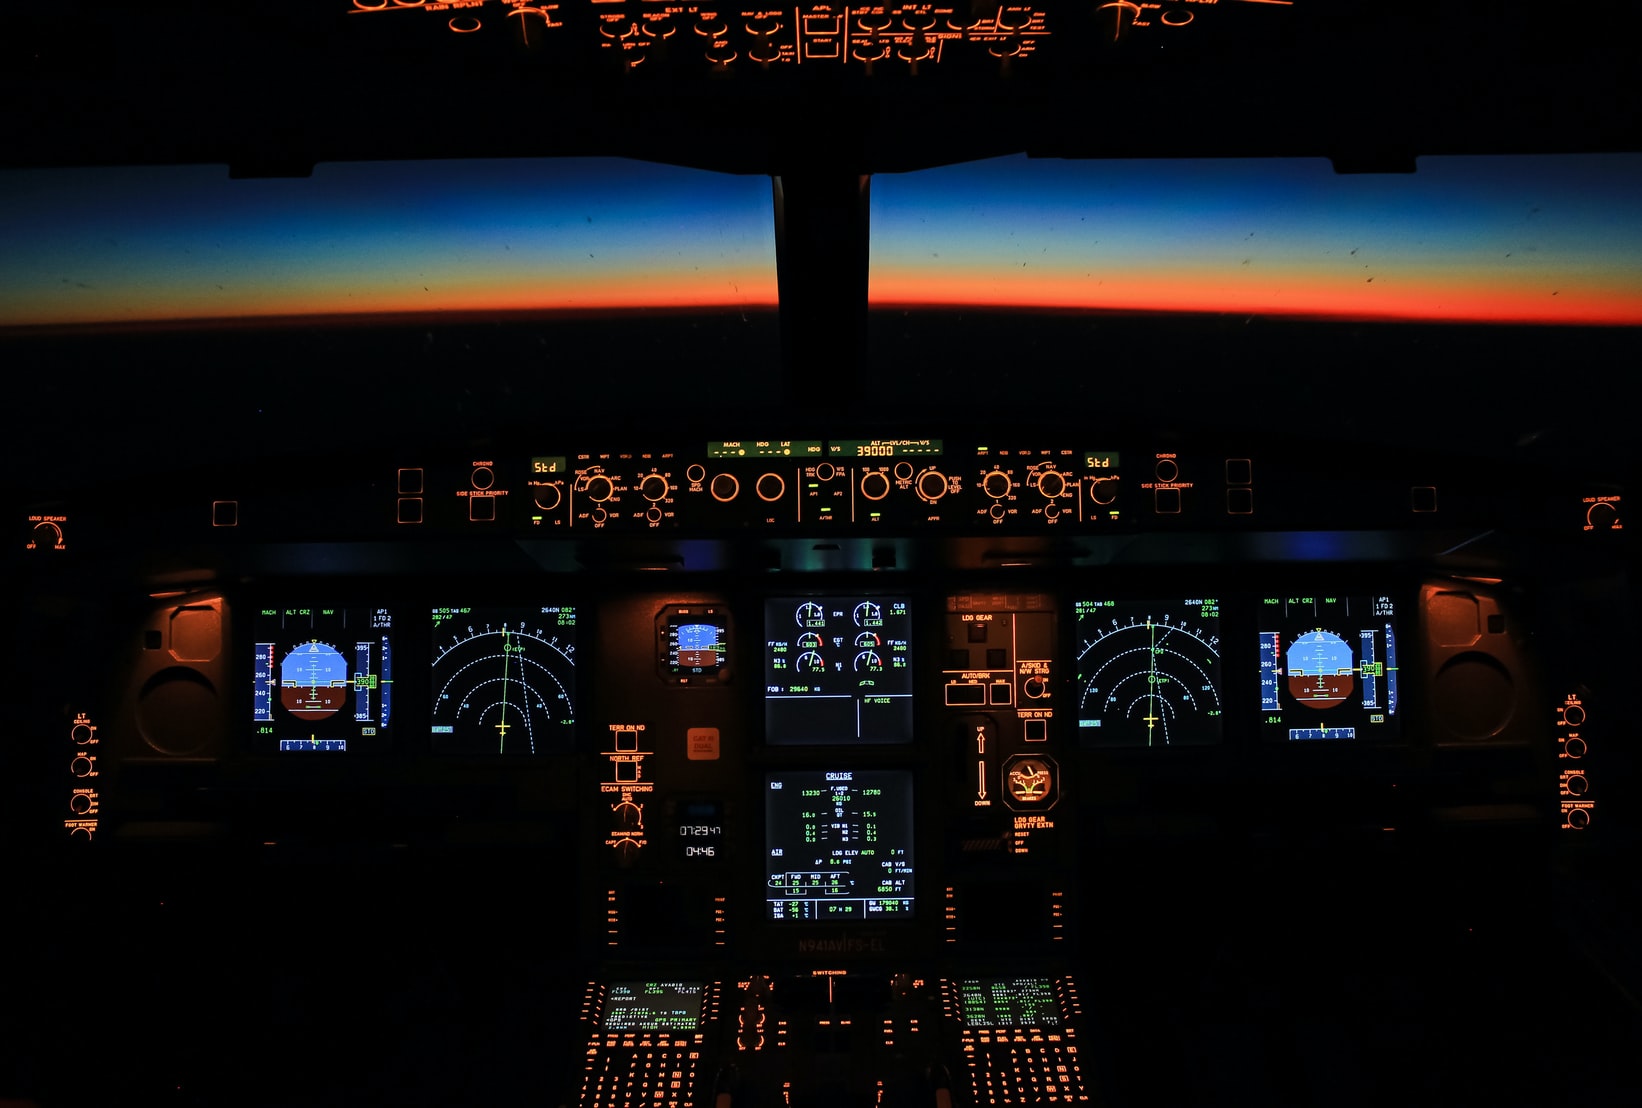 View of A330-200 cockpit while over the Atlantic Ocean